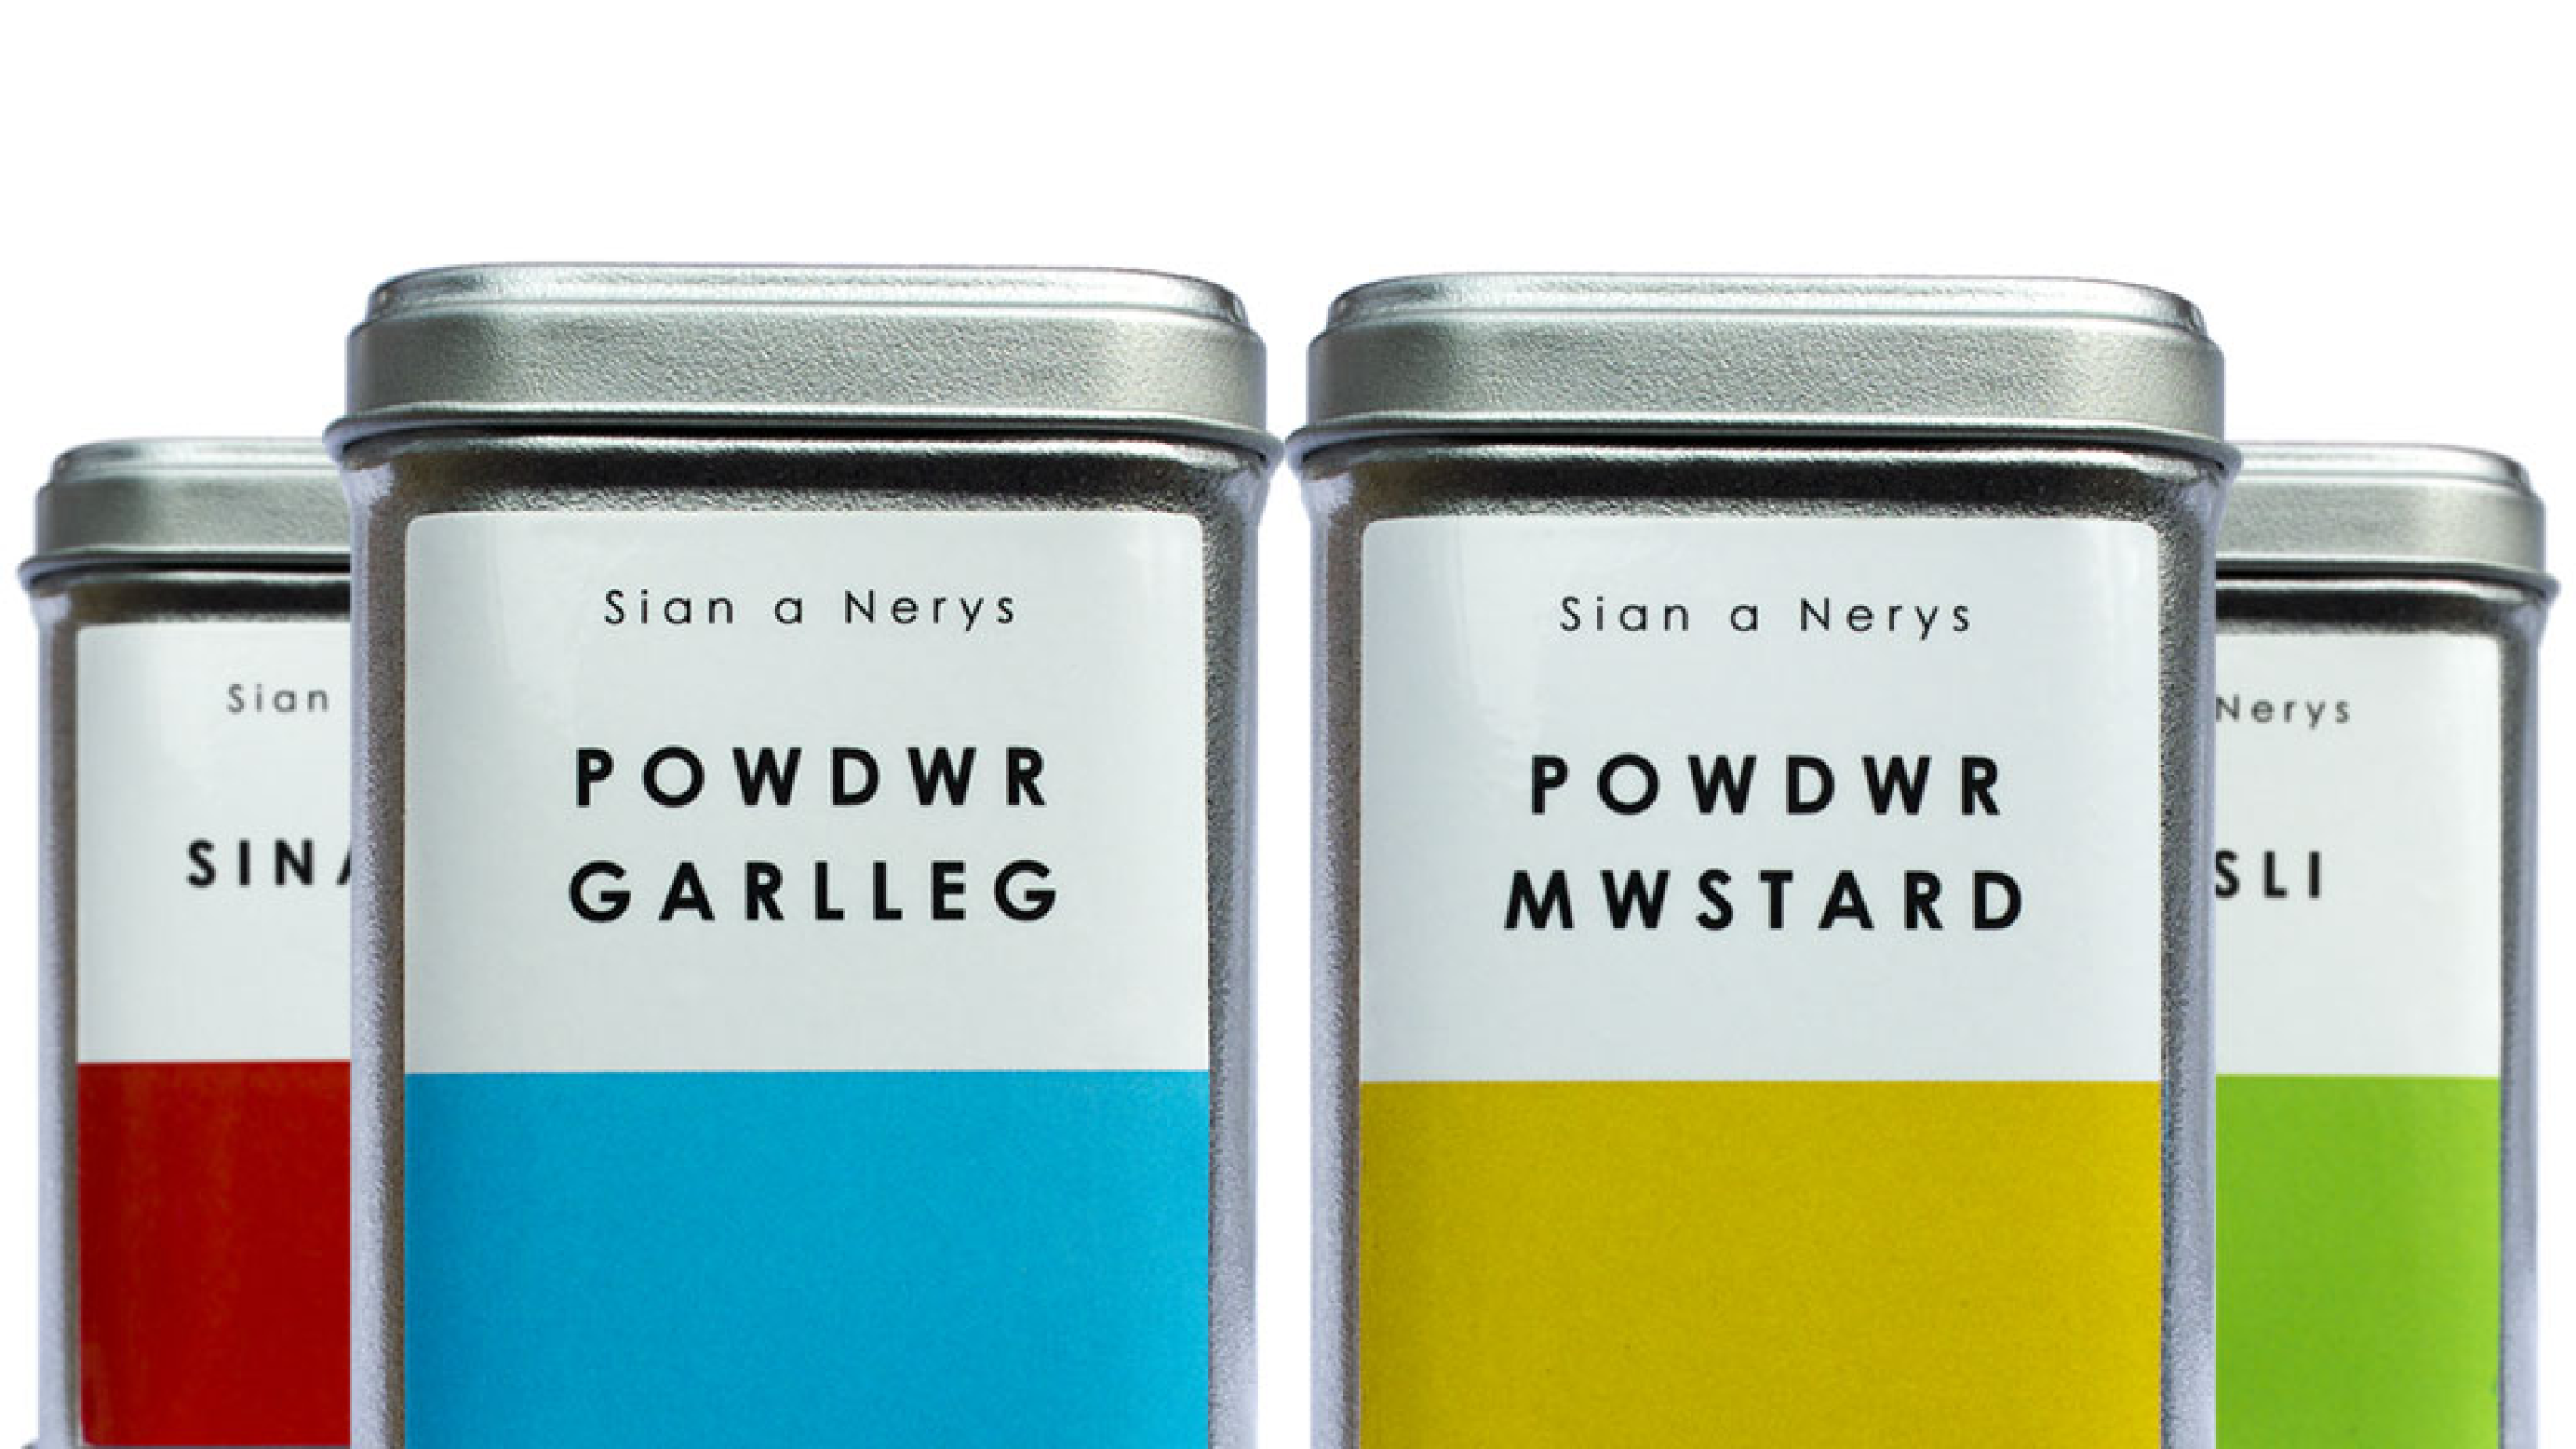 Sian a Nerys Welsh language spice tin packaging with labels.